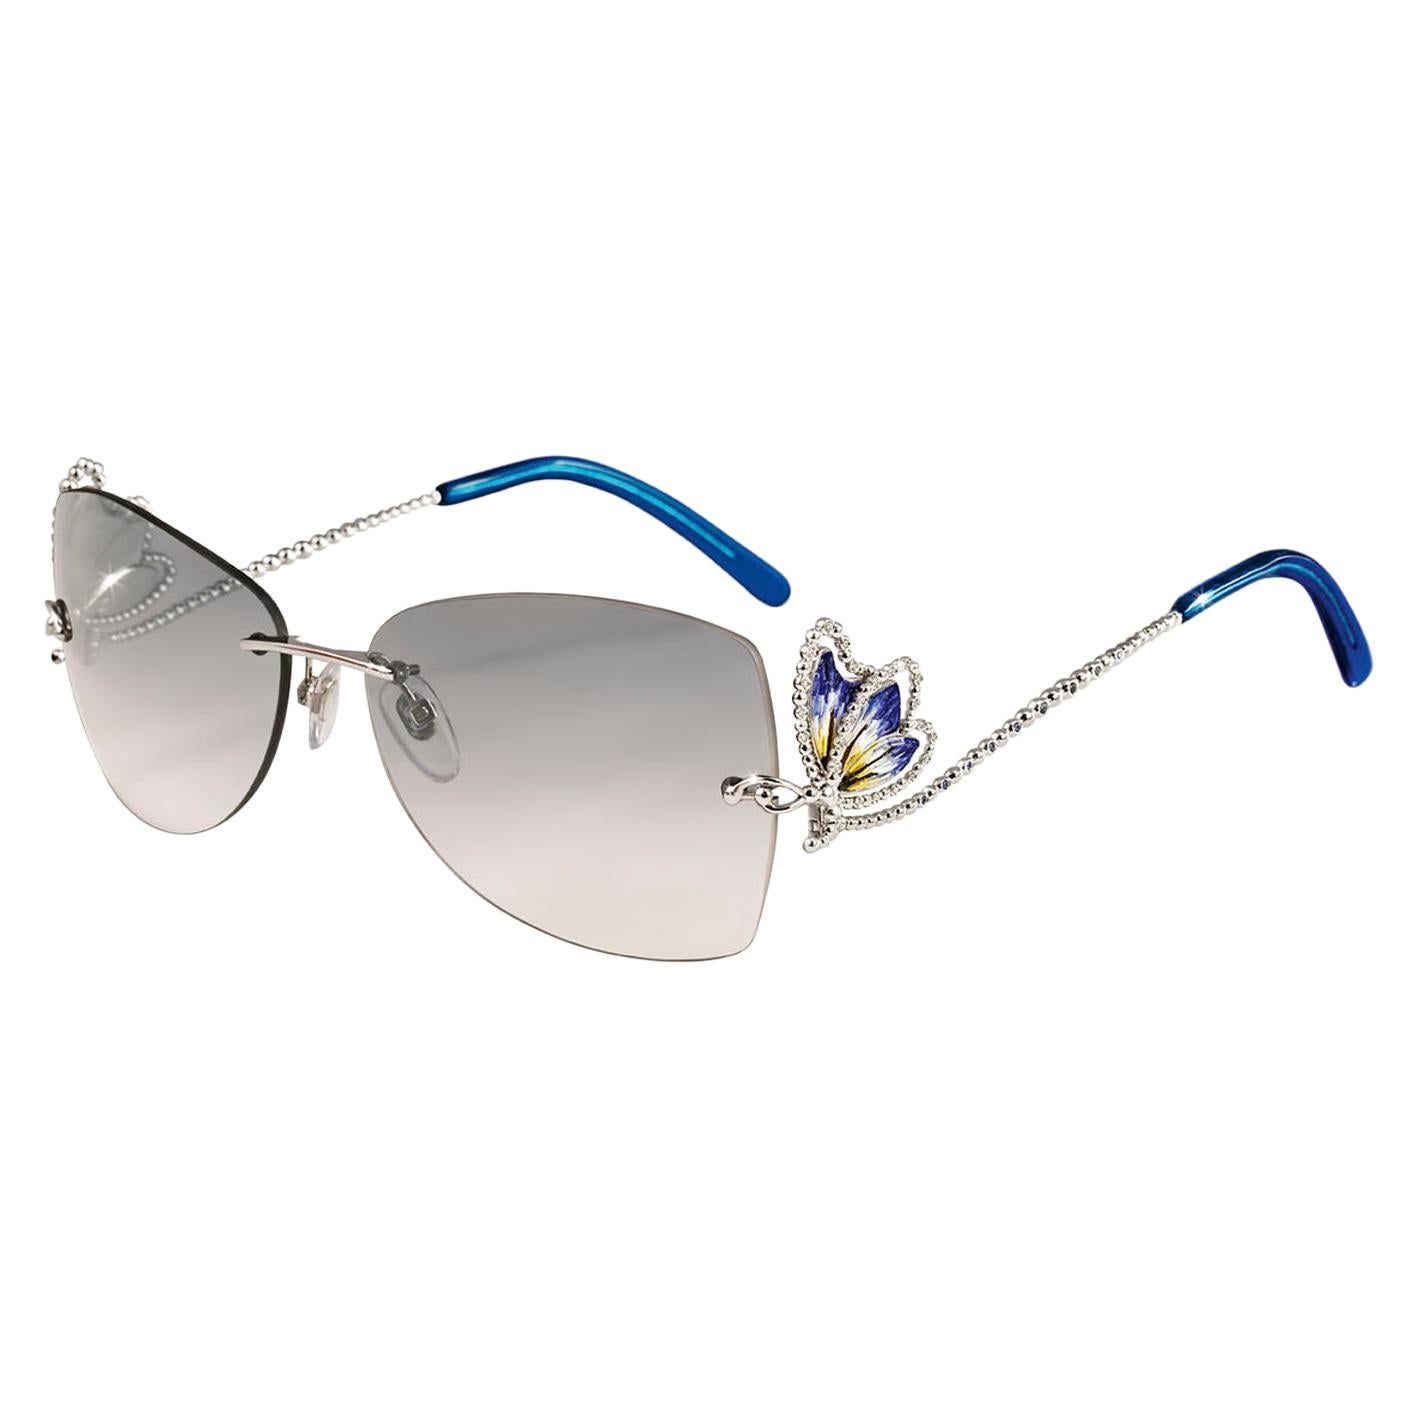 Sunglasses White Gold White Diamonds Sapphires Hand Decorated with Micromosaic For Sale